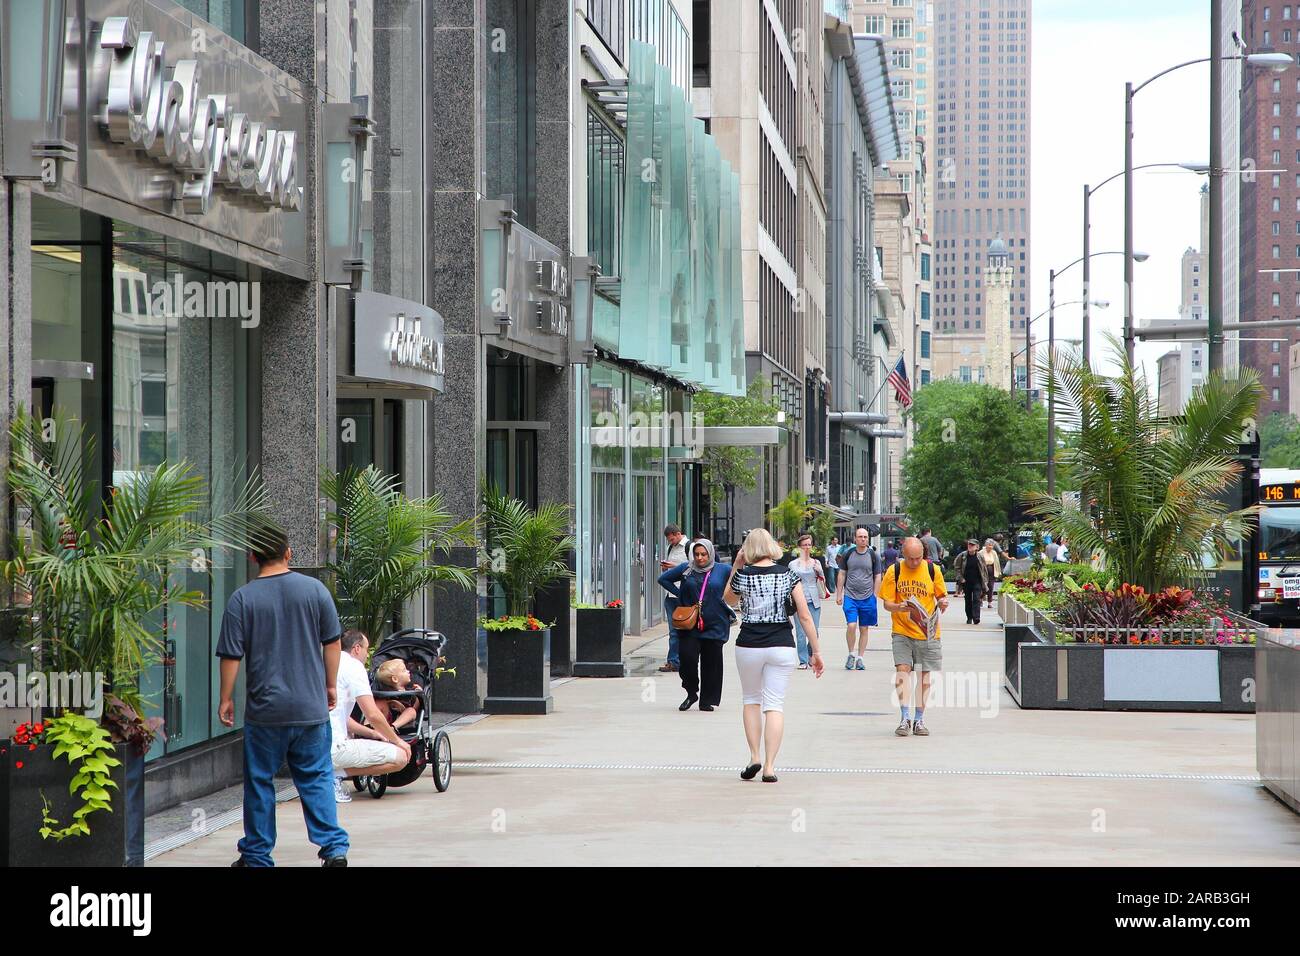 CHICAGO, USA - JUNE 26, 2013: People walk the famous Magnificent Mile of Michigan Avenue in Chicago. It is Chicago's major shopping destination and on Stock Photo